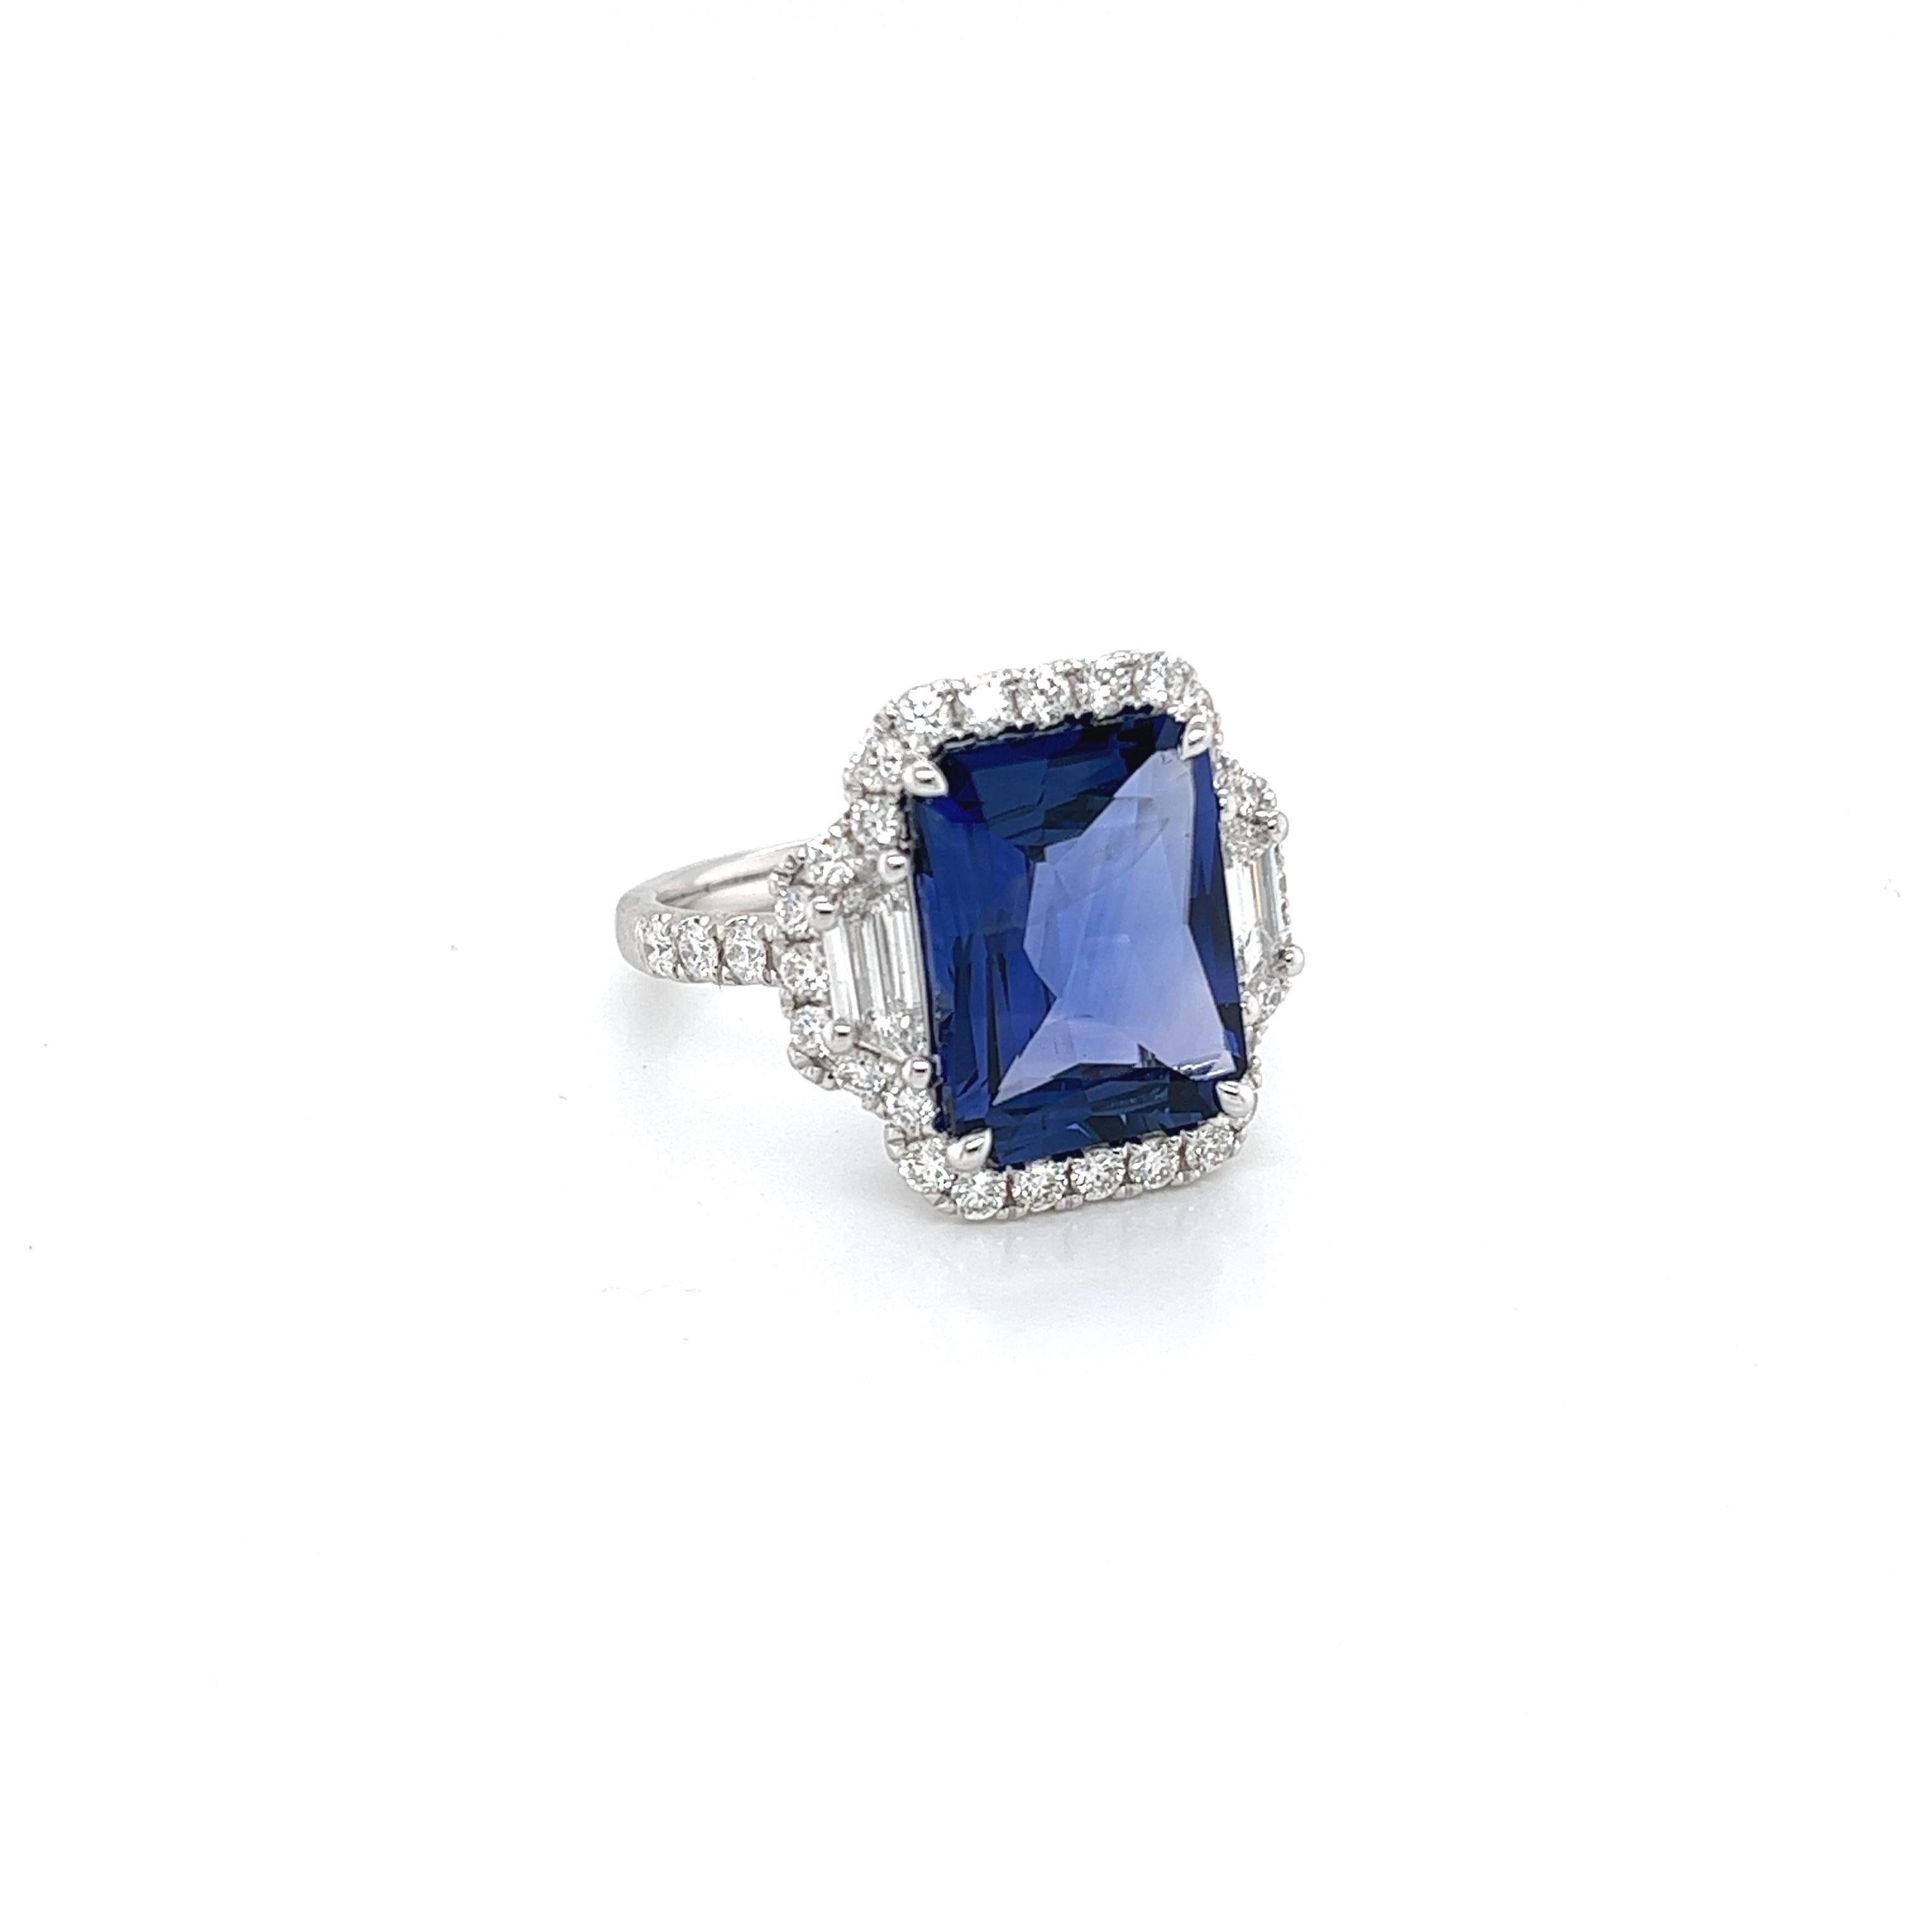 Radiant Ceylon sapphire weighing 5.81 cts
Measuring (12.7x9.7x4.6) mm
Round Diamonds weighing .72 cts
Trapezoid Diamonds weighing .43 cts
Set in 18k white gold ring
5.61 g